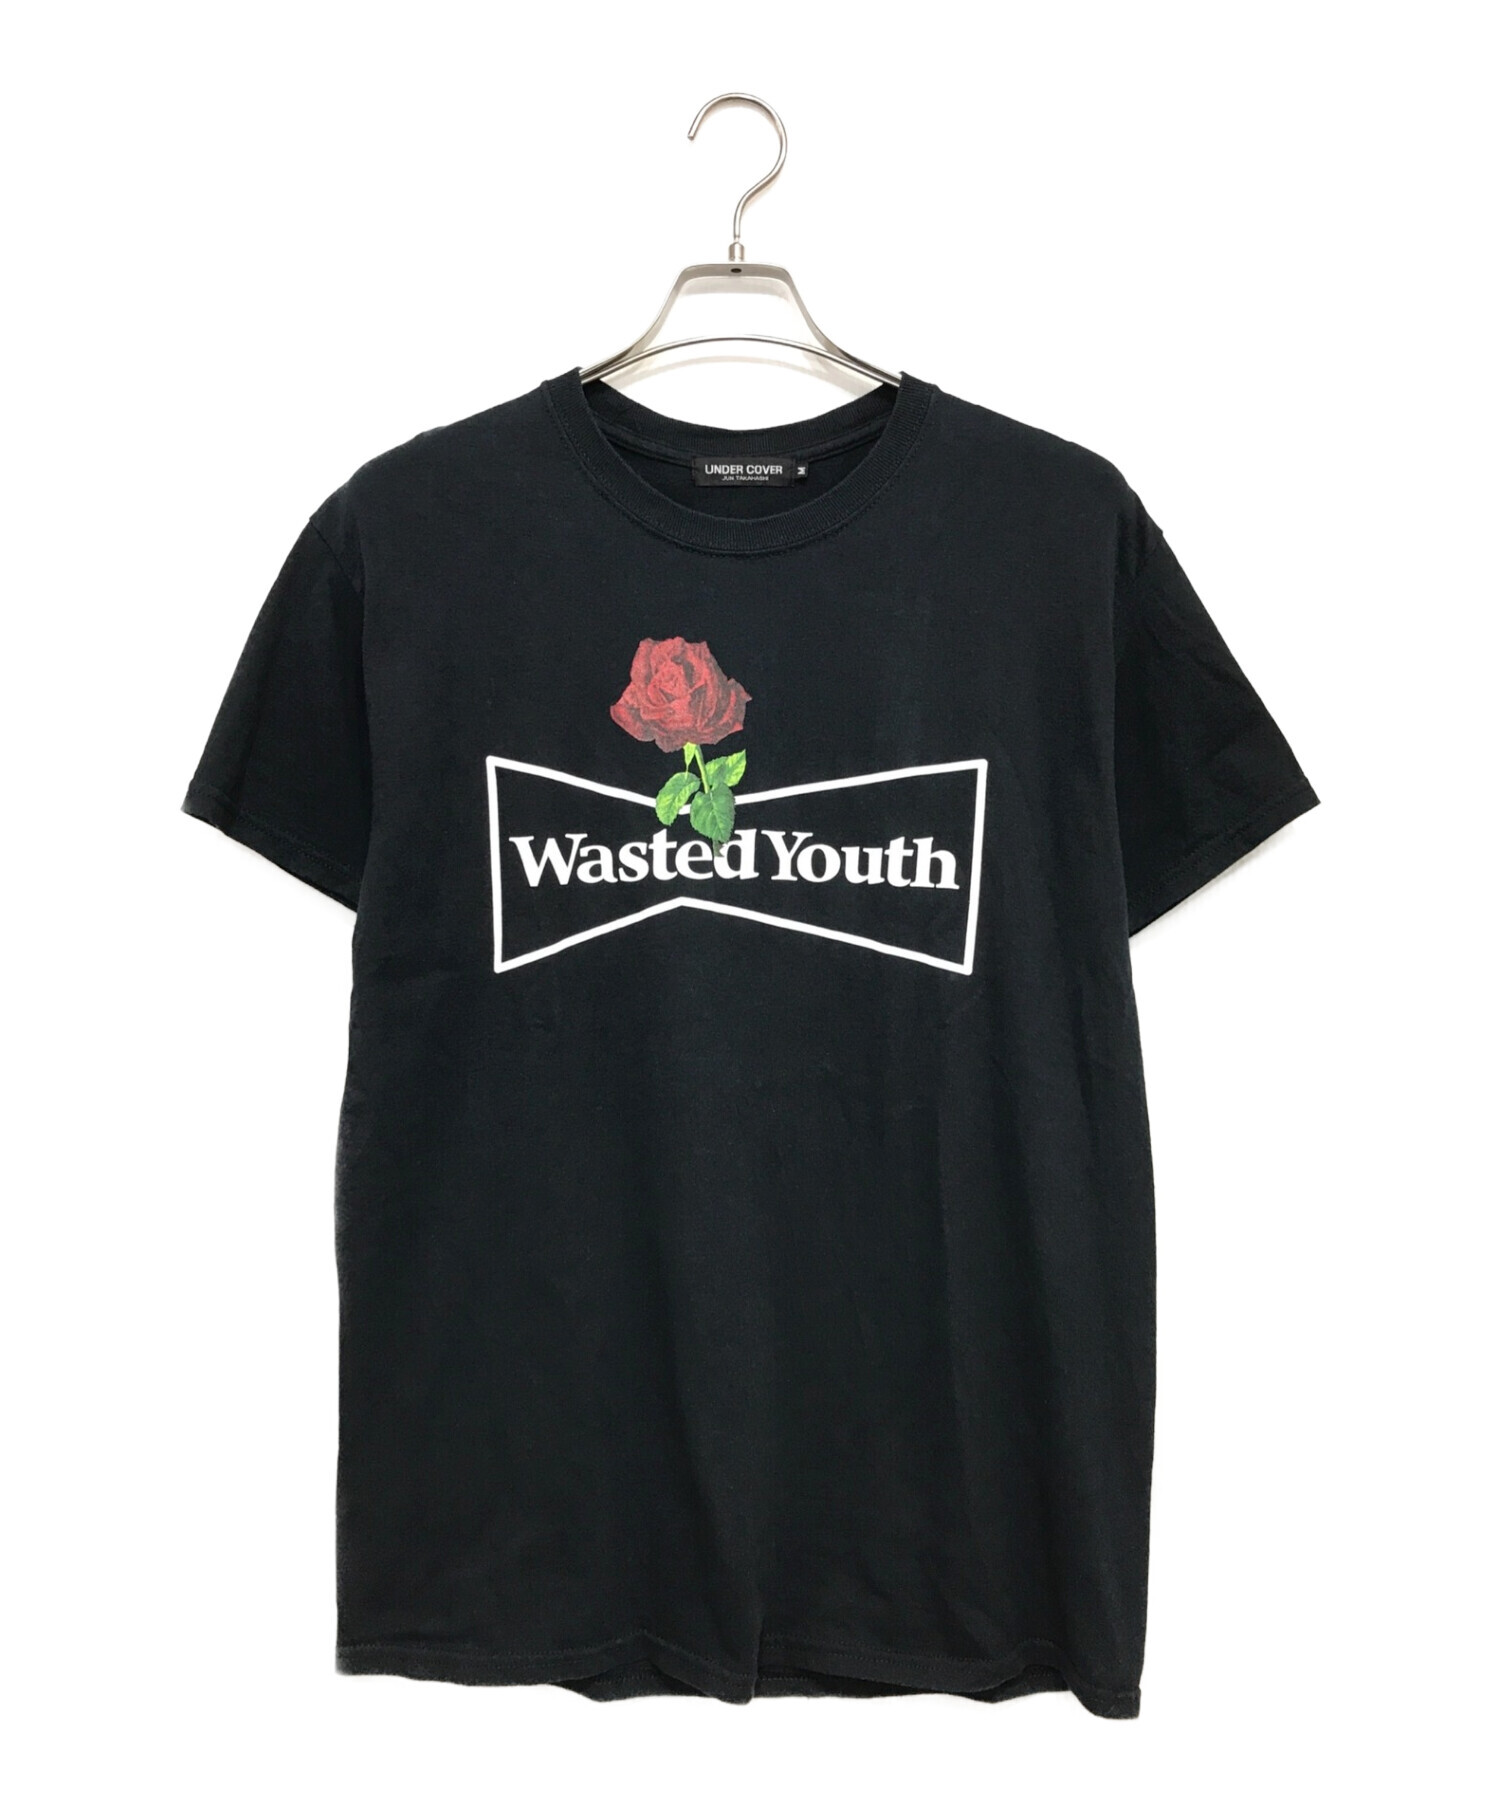 undercover wasted youth コラボt-